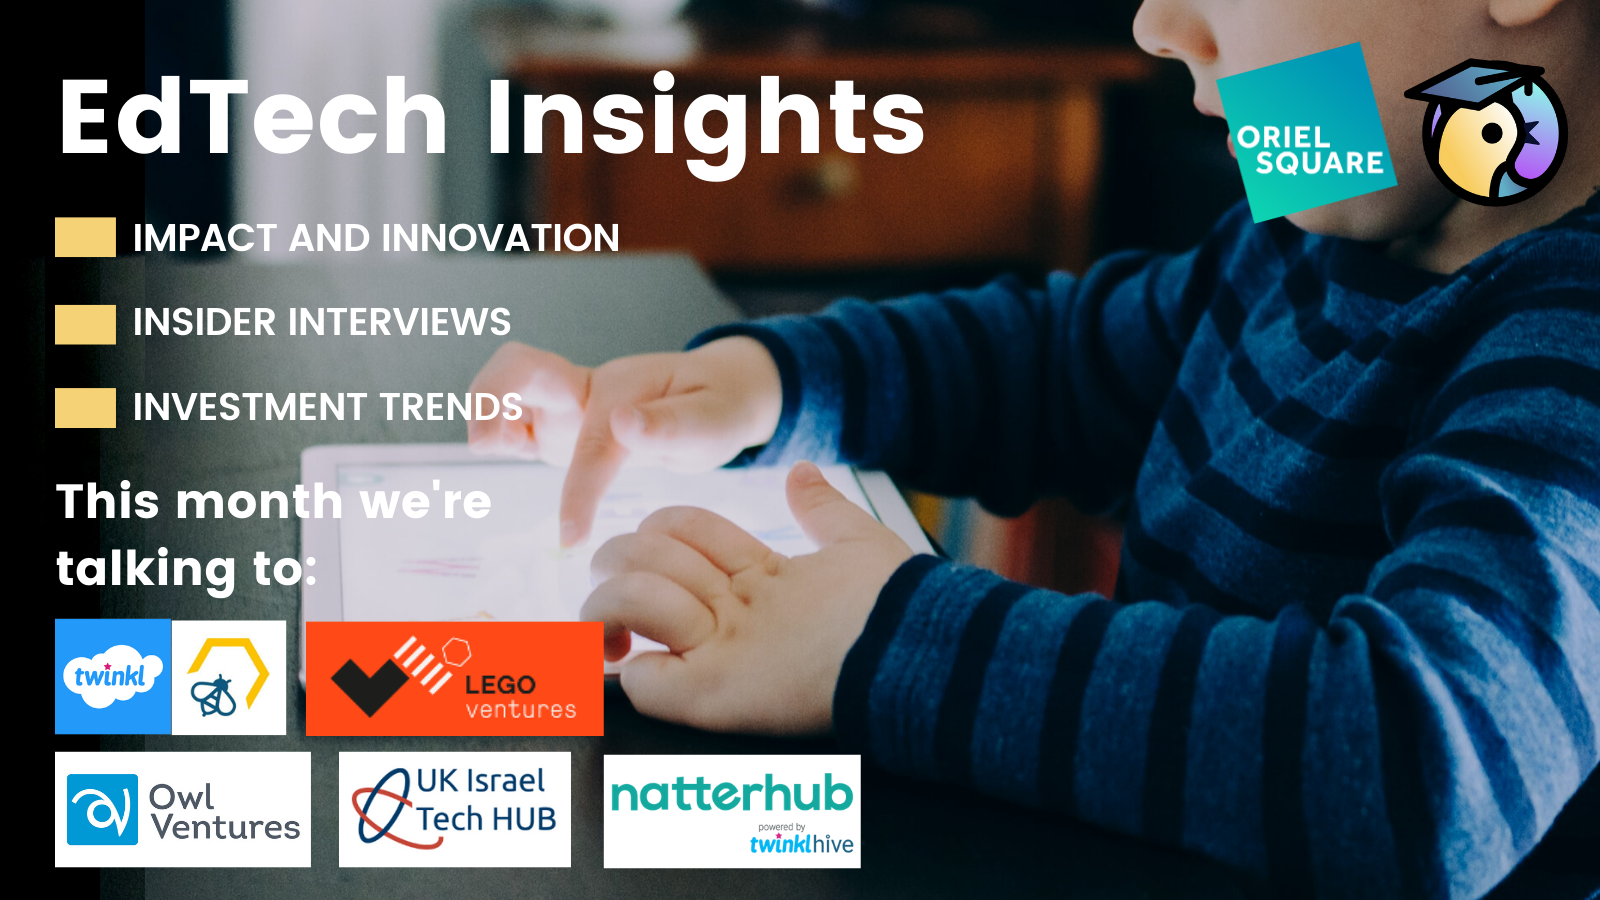 EdTech insights highlights on background of person using tablet.